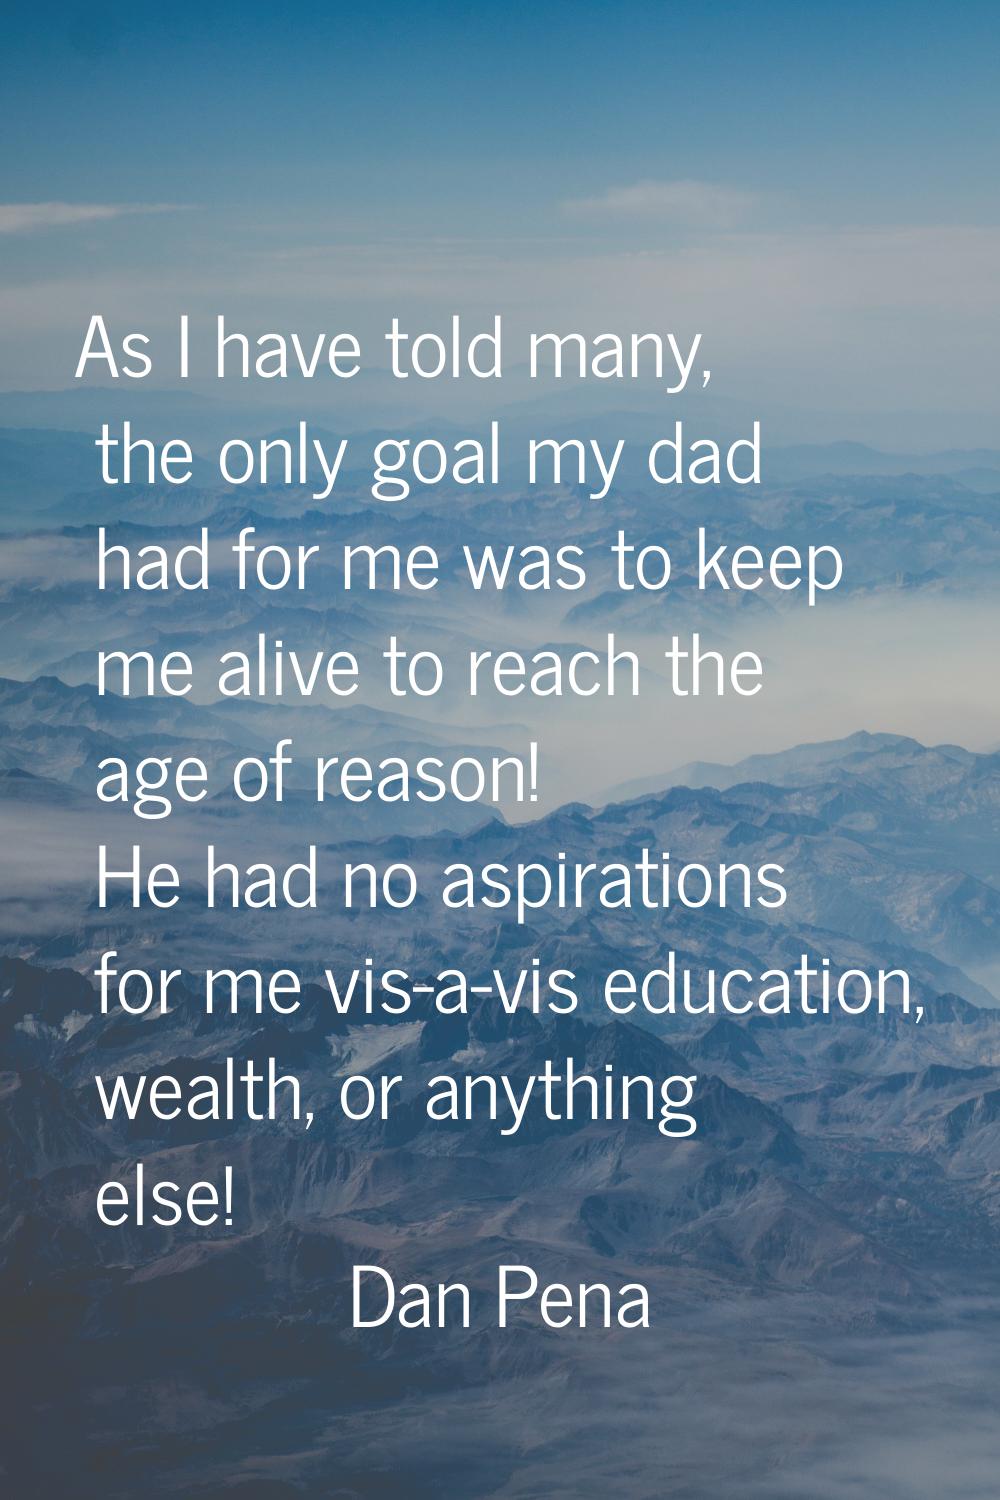 As I have told many, the only goal my dad had for me was to keep me alive to reach the age of reaso